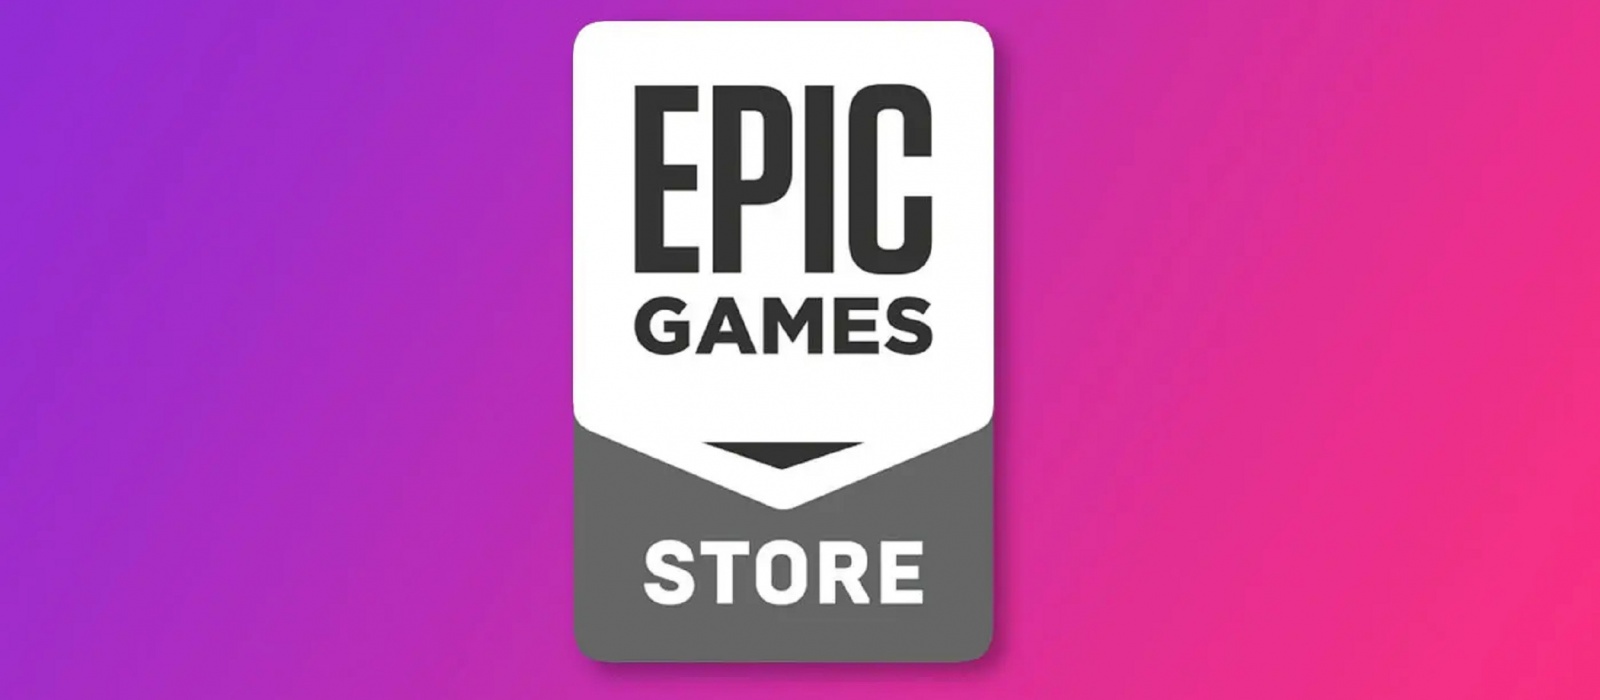 Epic тег. Вабом геймс. Epic games Store icon. Футболка фирма Epic games. More developers.